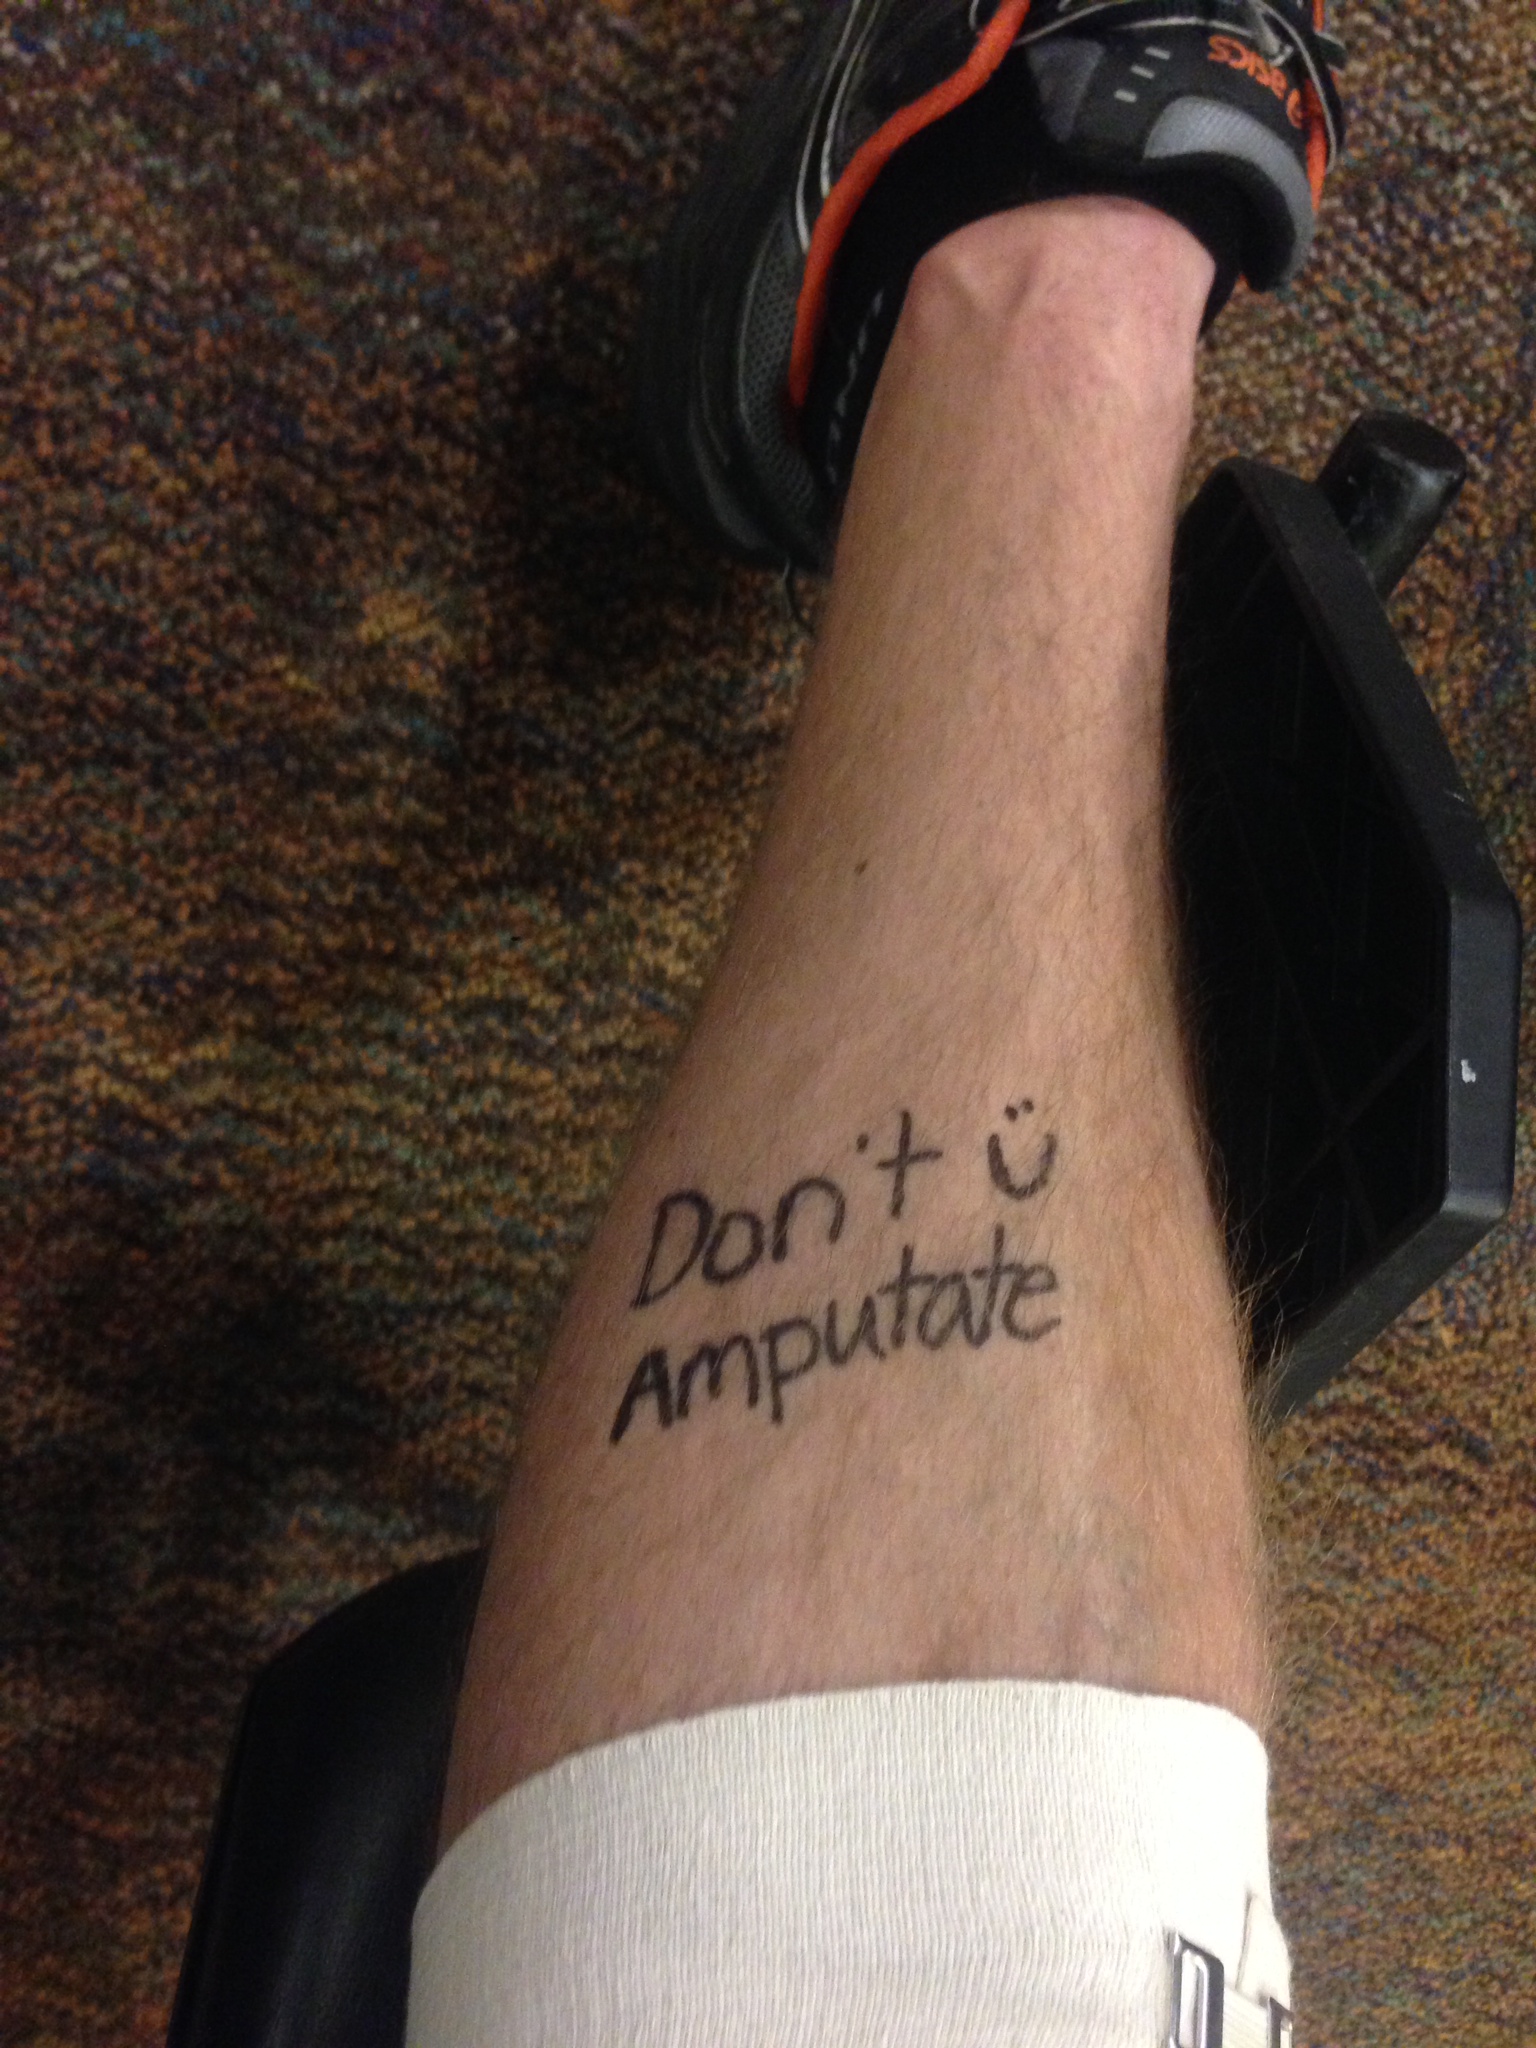 Don't Amputate